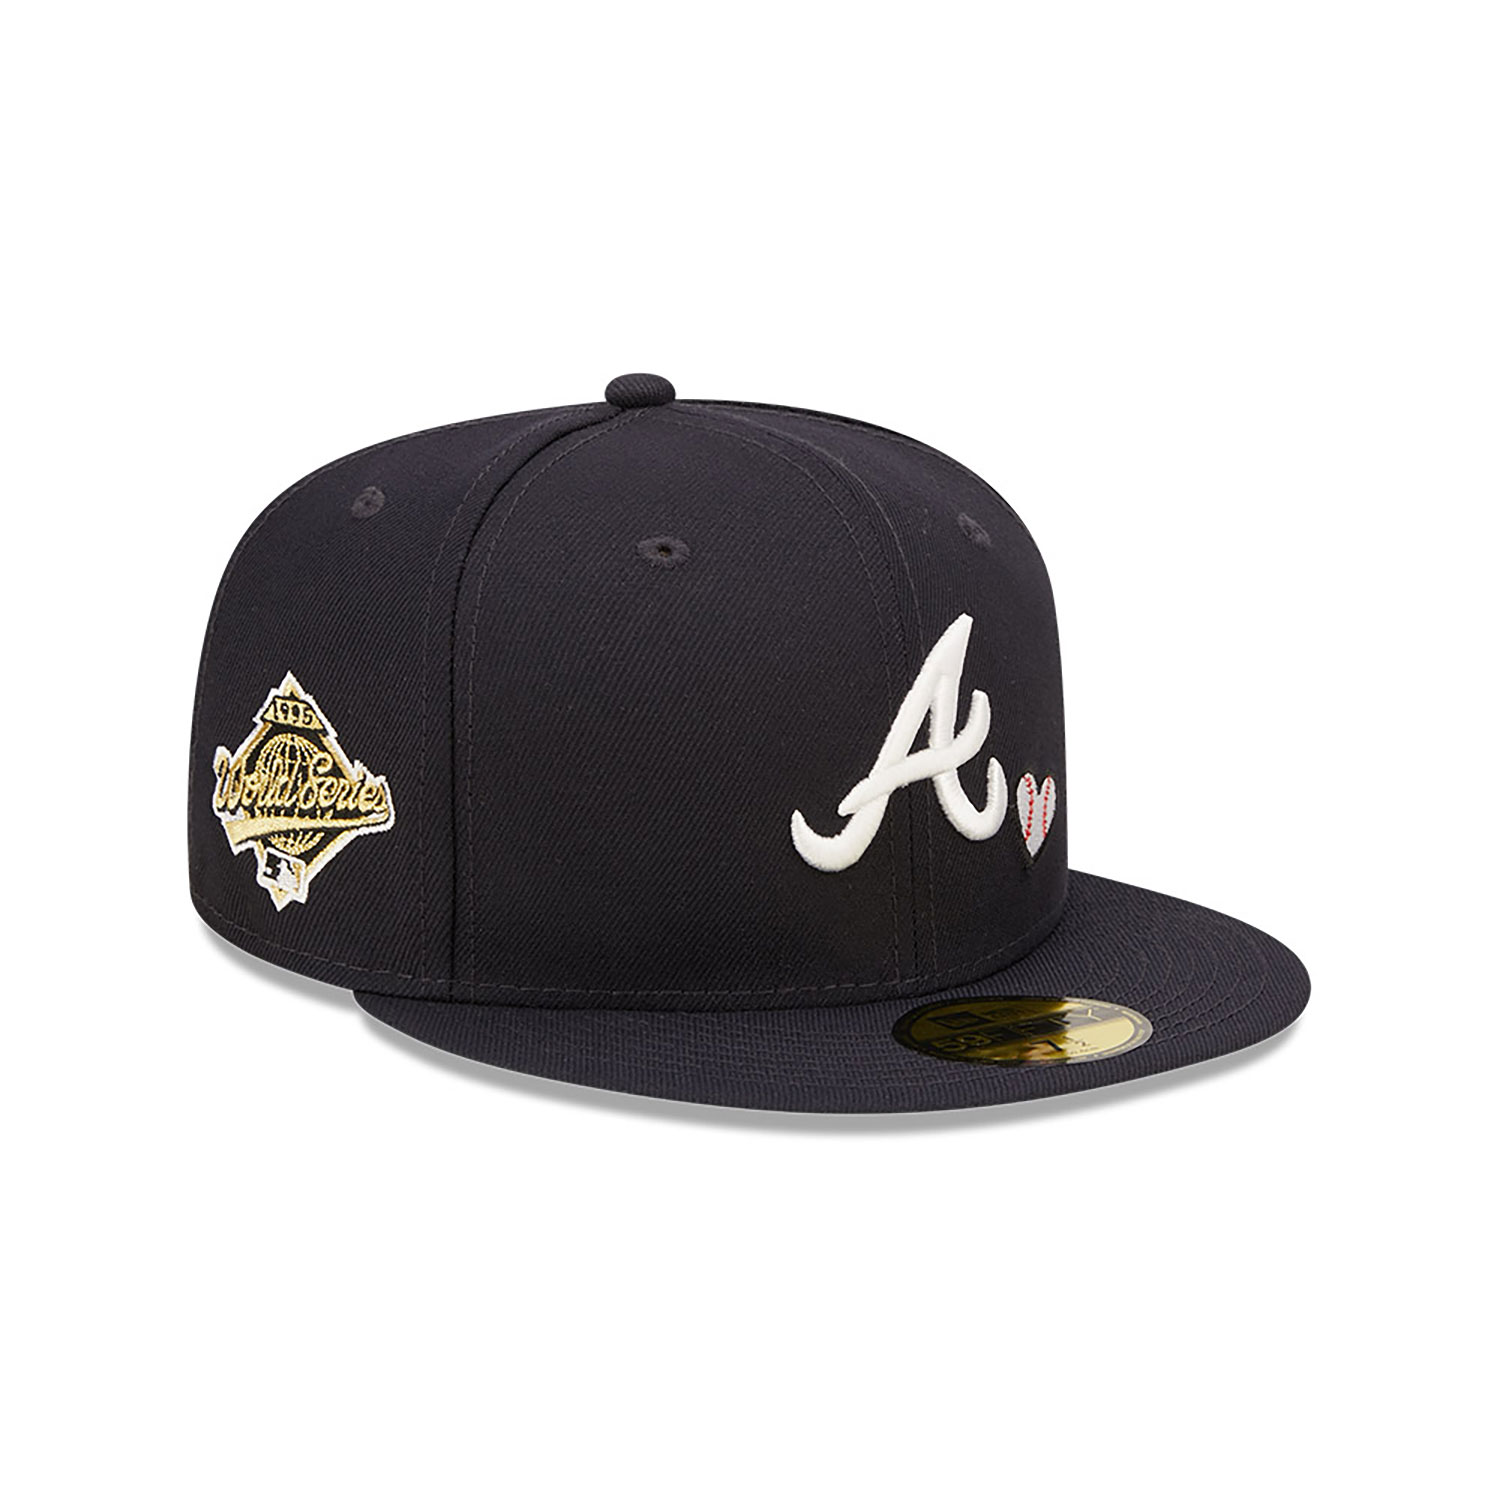 https://www.neweracap.co.uk/globalassets/products/b5198_251/60243664/atlanta-braves-team-heart-blue-59fifty-fitted-cap-60243664-left.jpg